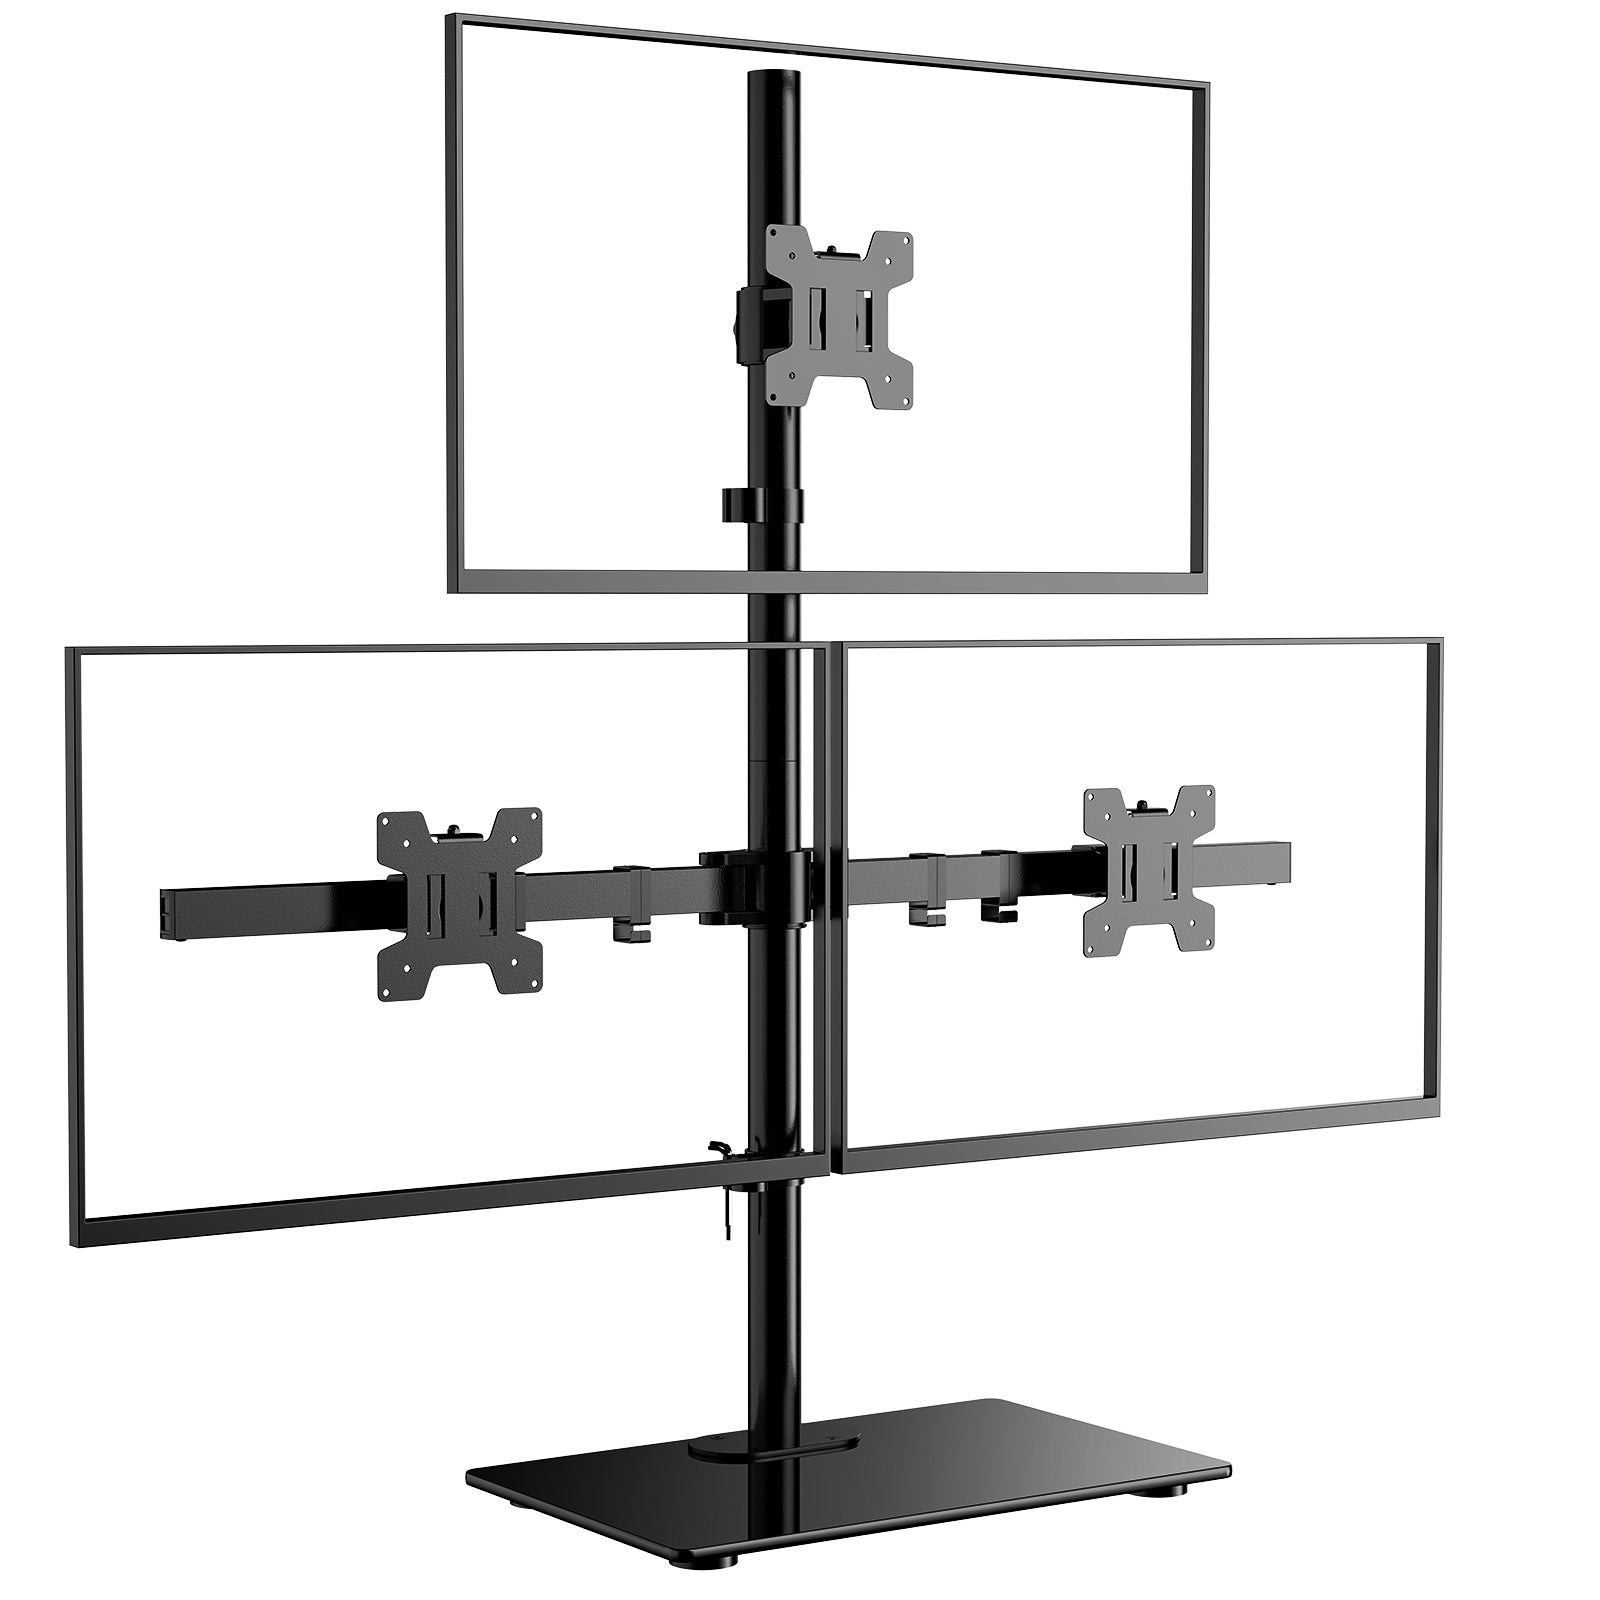 WALI Triple Monitor Stand, fits 3 Computer Screens up to 27 Inch, Holds up  to 22lbs per Arm (GMF003)